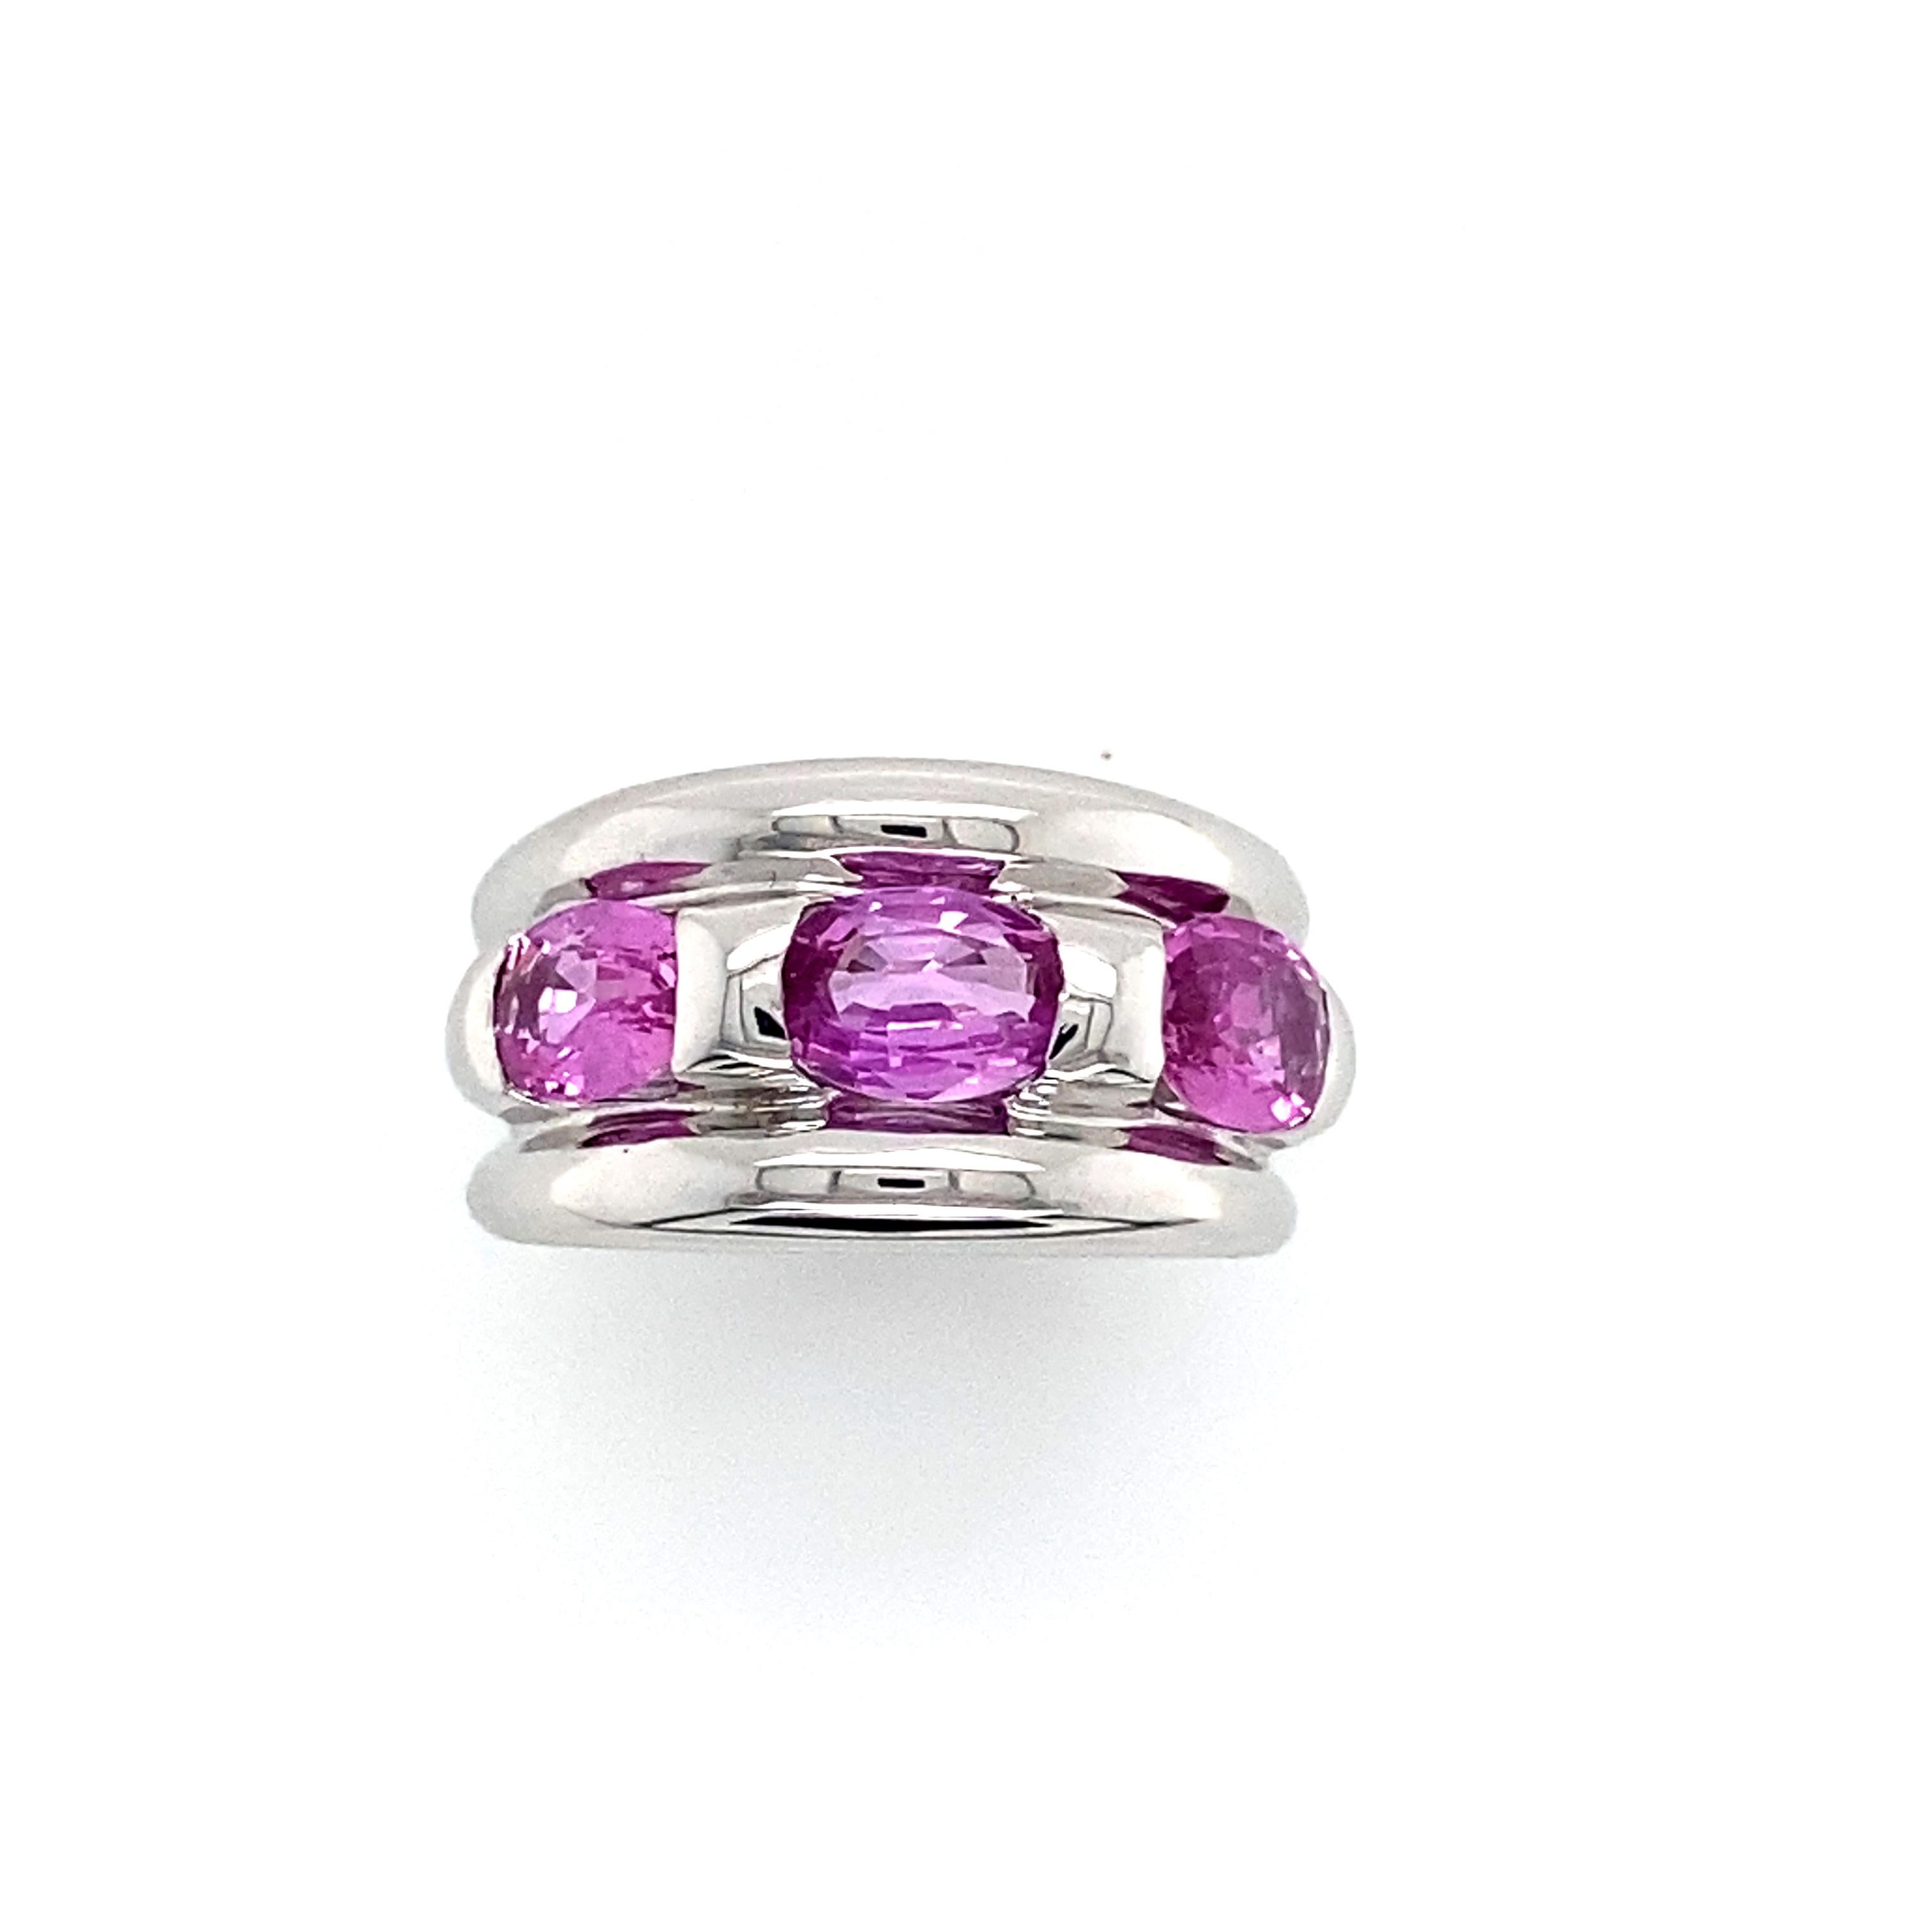 Art Deco 18K White Gold Ring with 3 Pink Sapphires